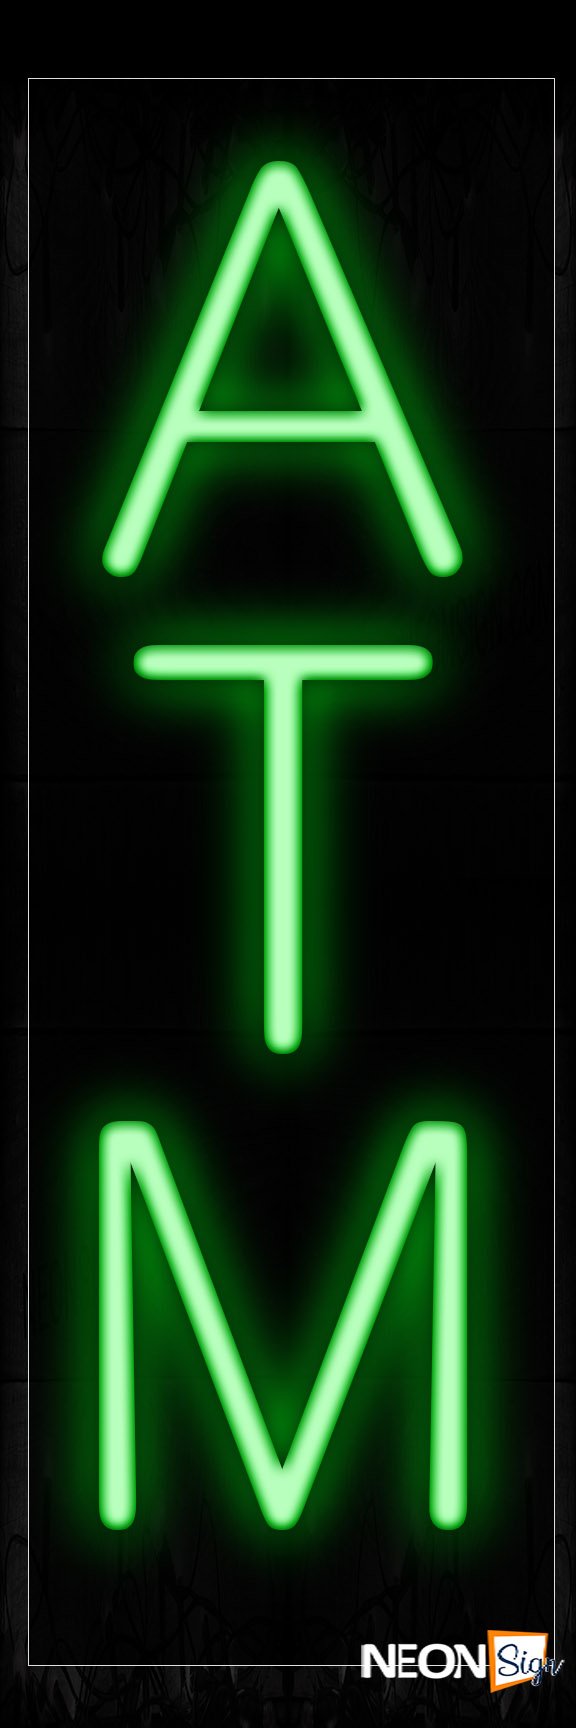 Image of 12196 Atm Neon Signs_8x24 Black Backing